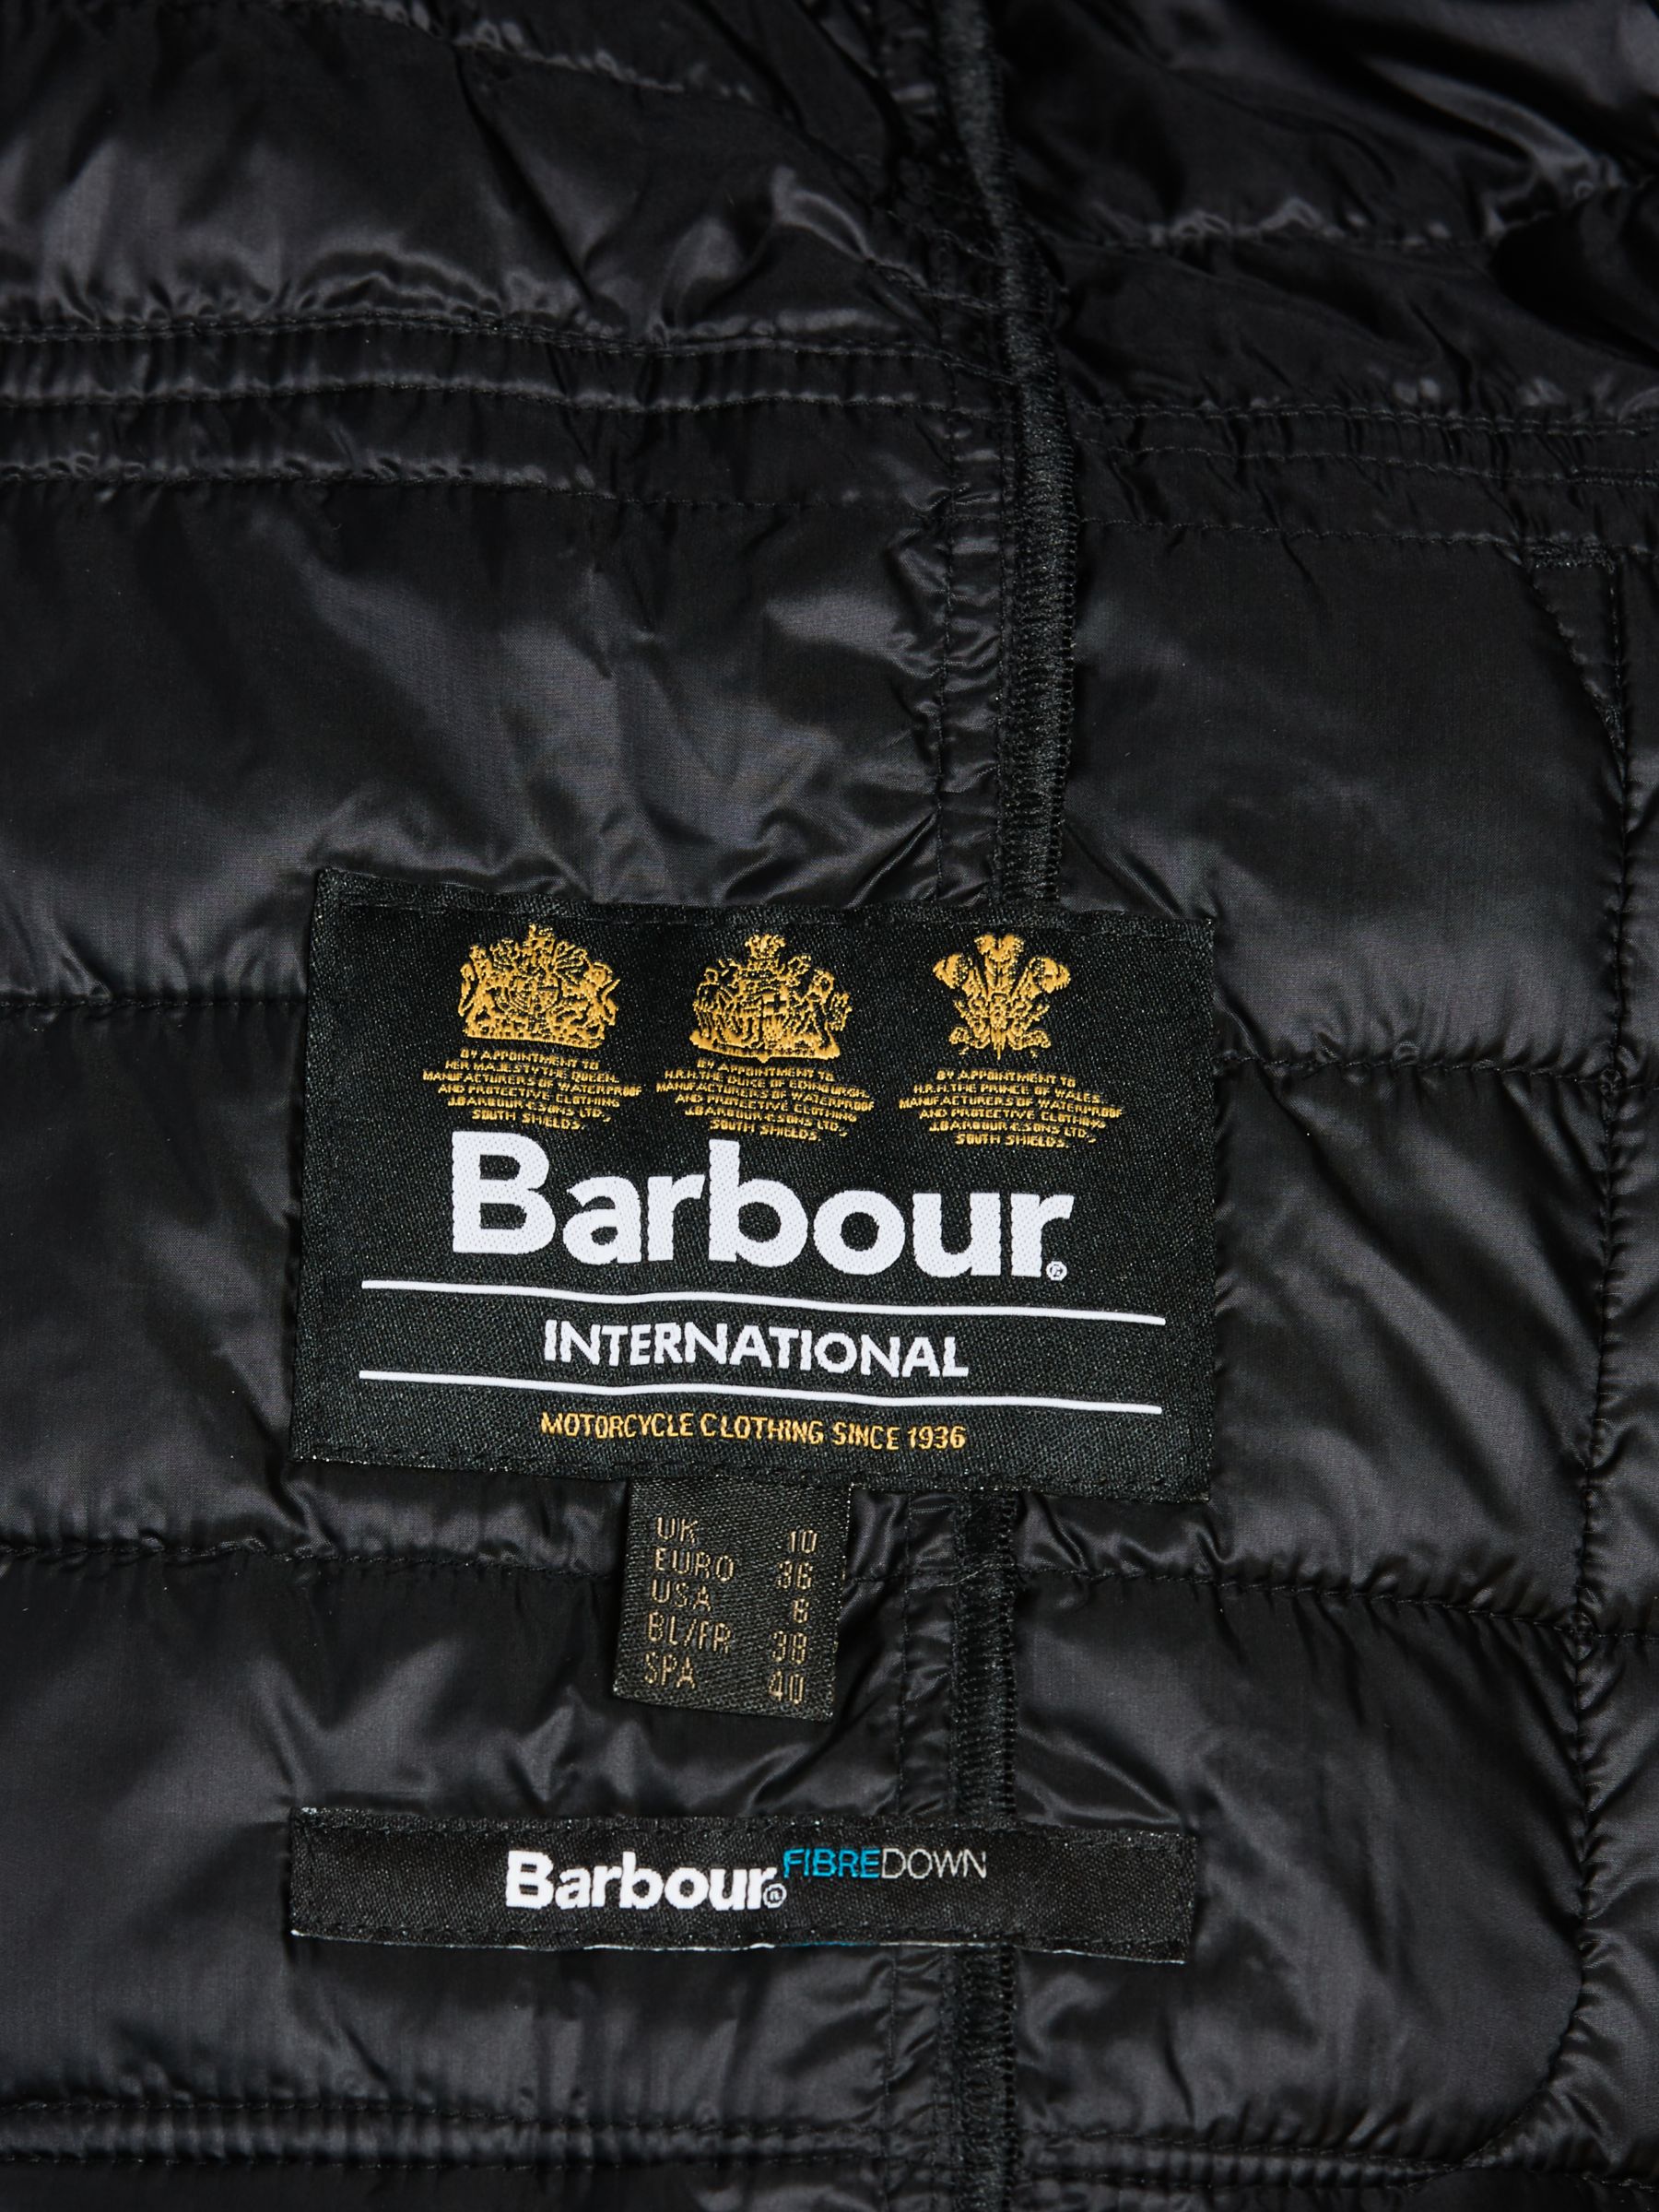 barbour international motorcycle clothing since 1936